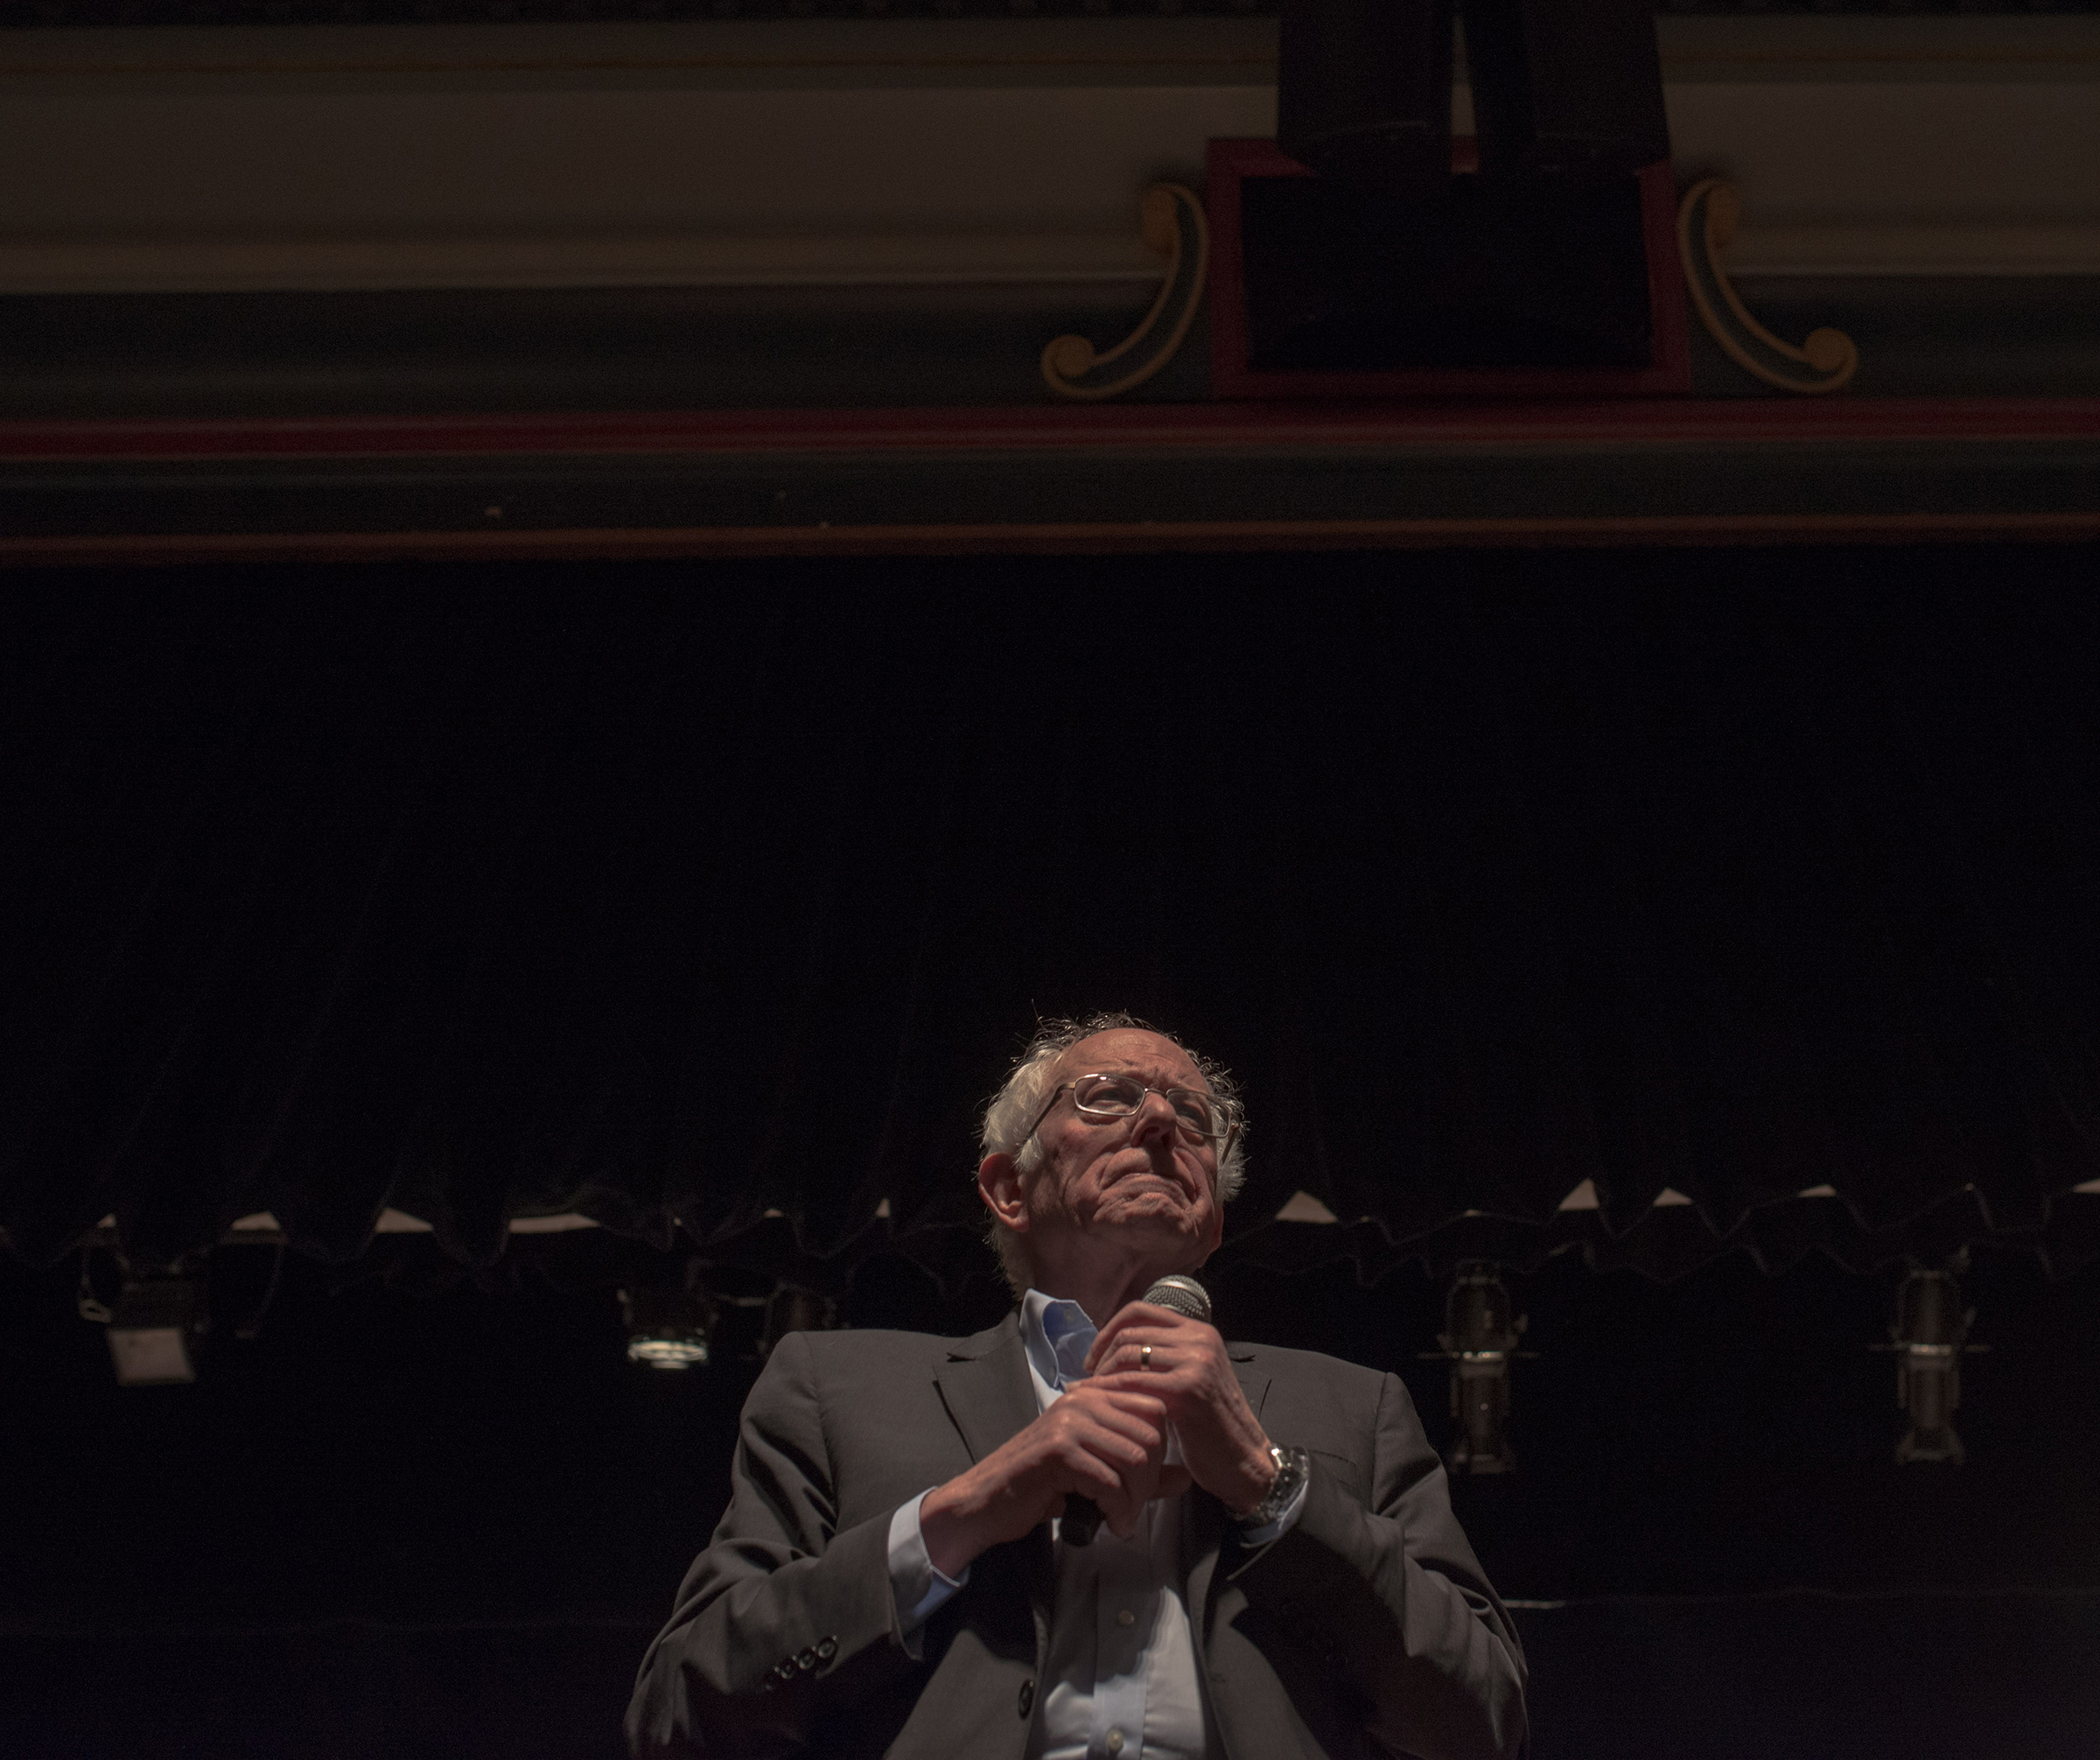 Sanders addresses supporters at a rally in Ames on Jan. 26